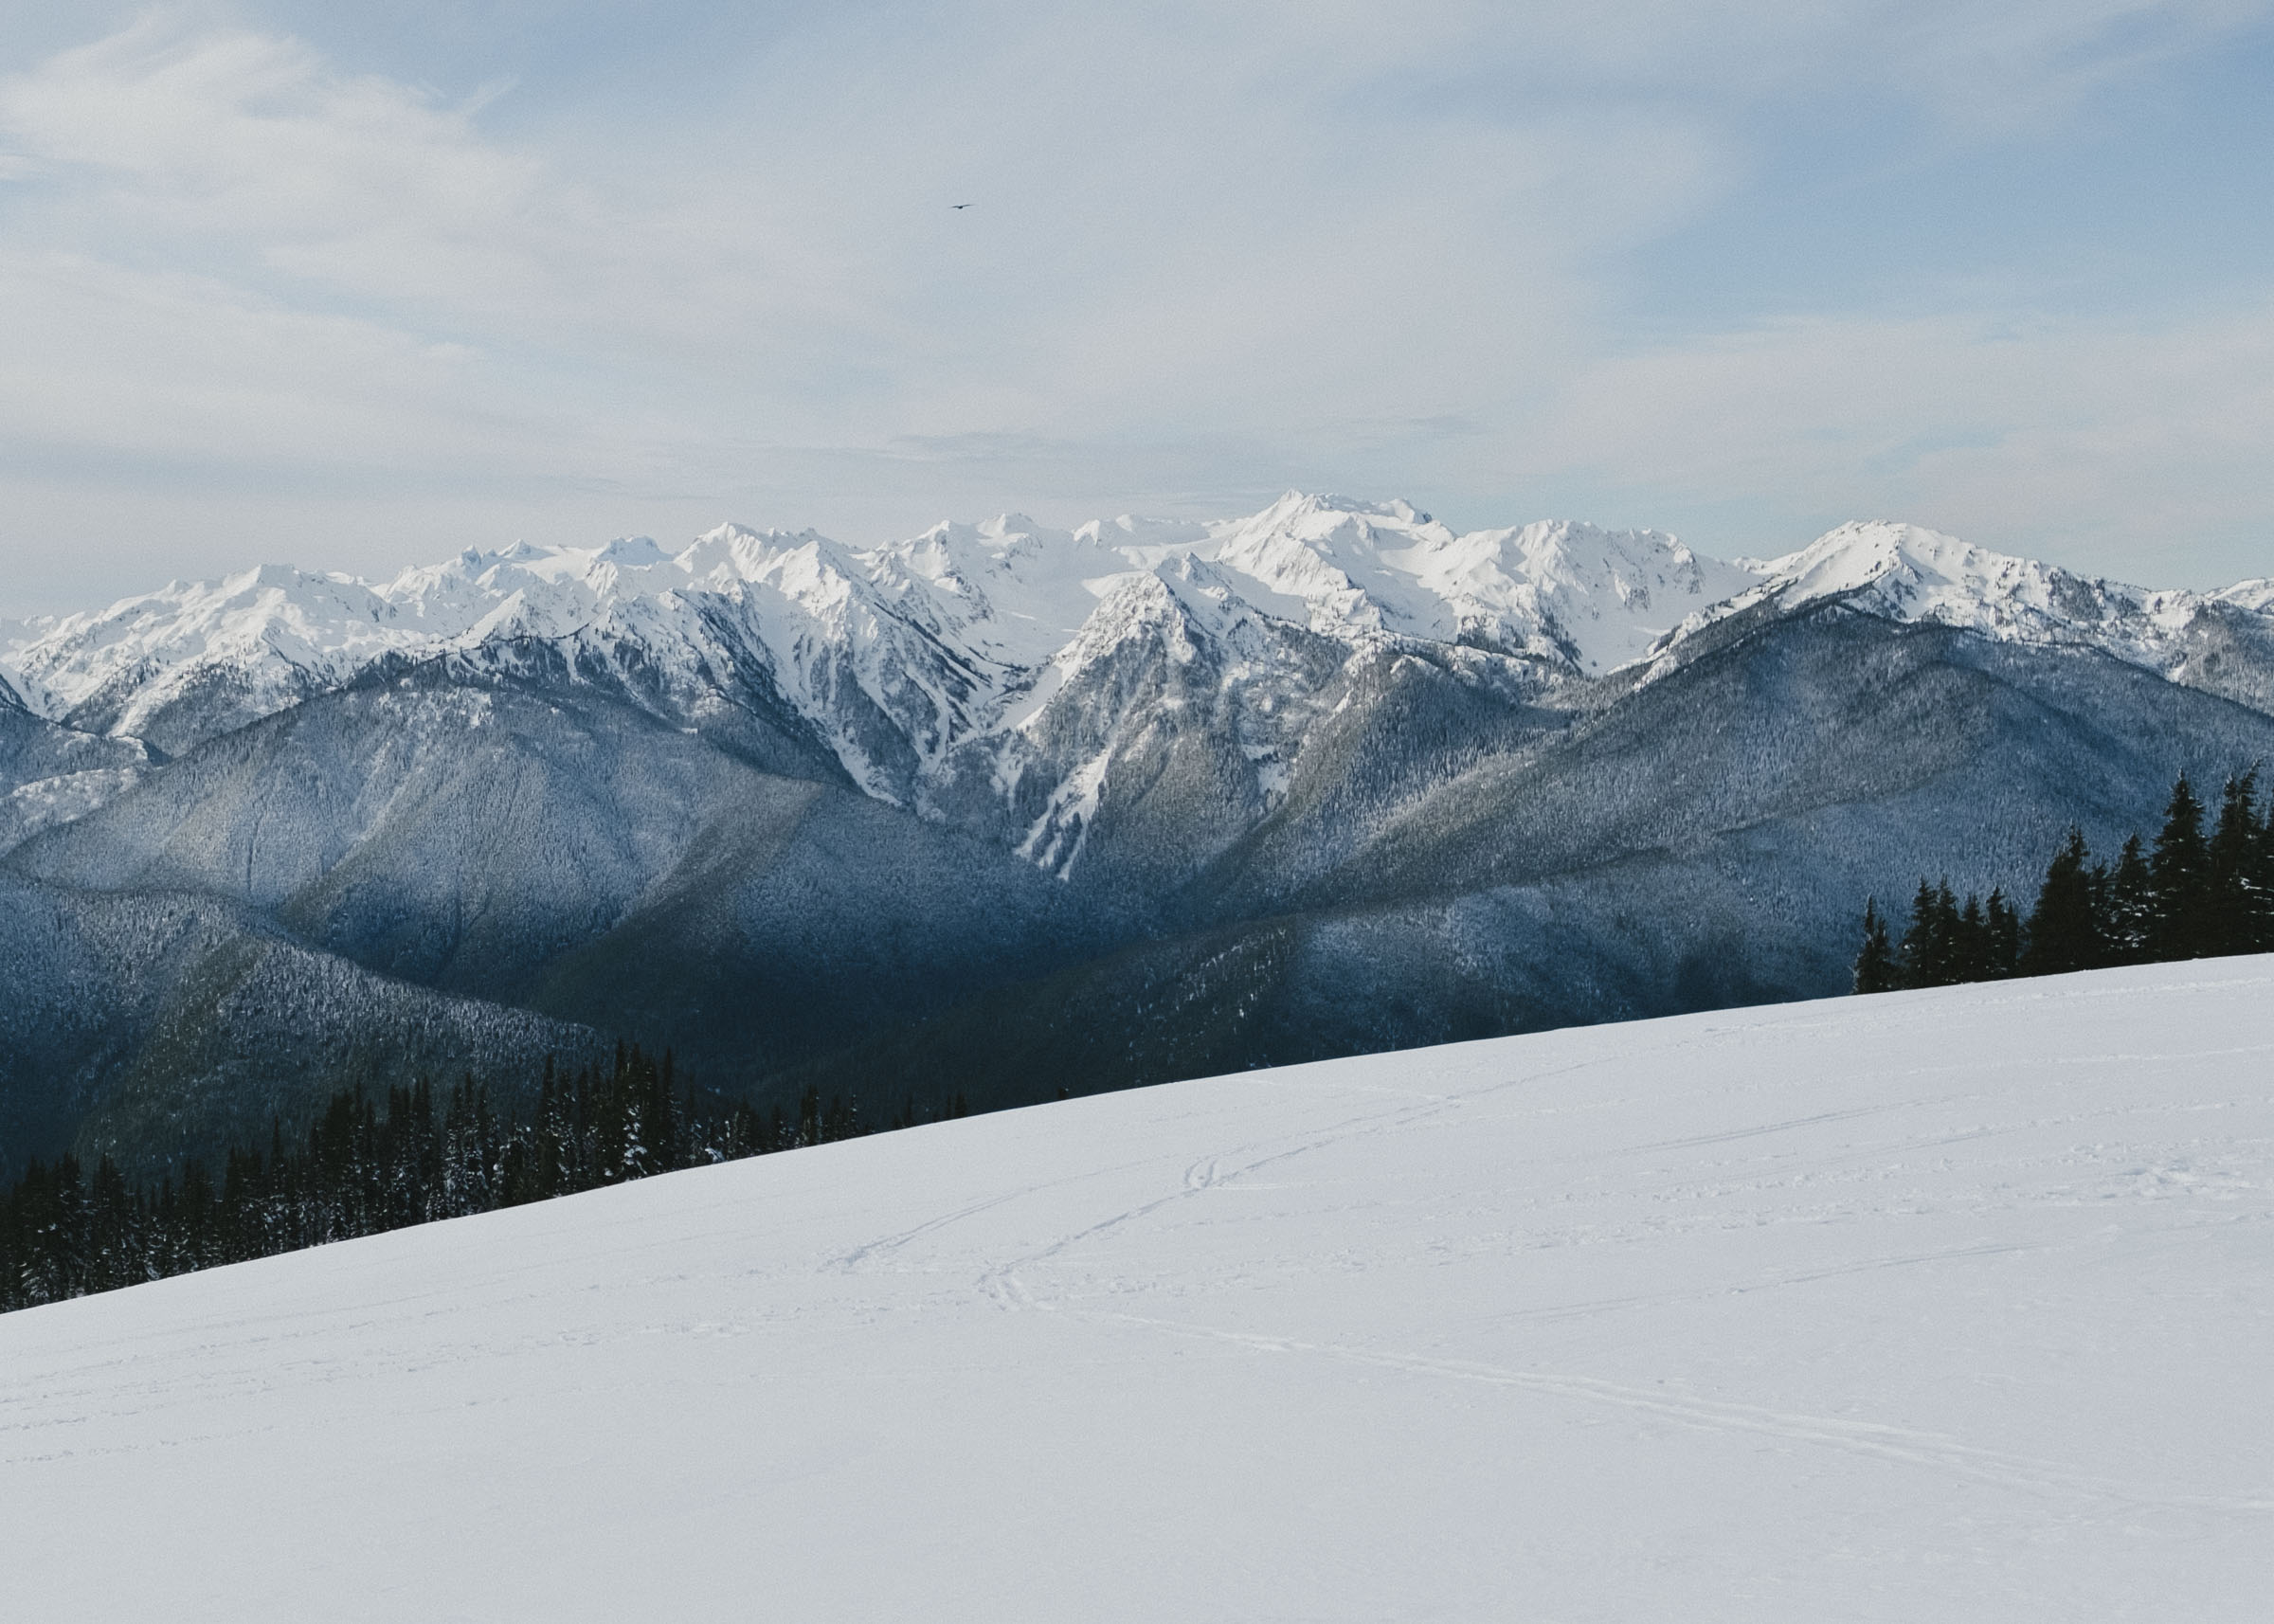 The Olympic Mountains all covered in snow from Hurricane Ridge